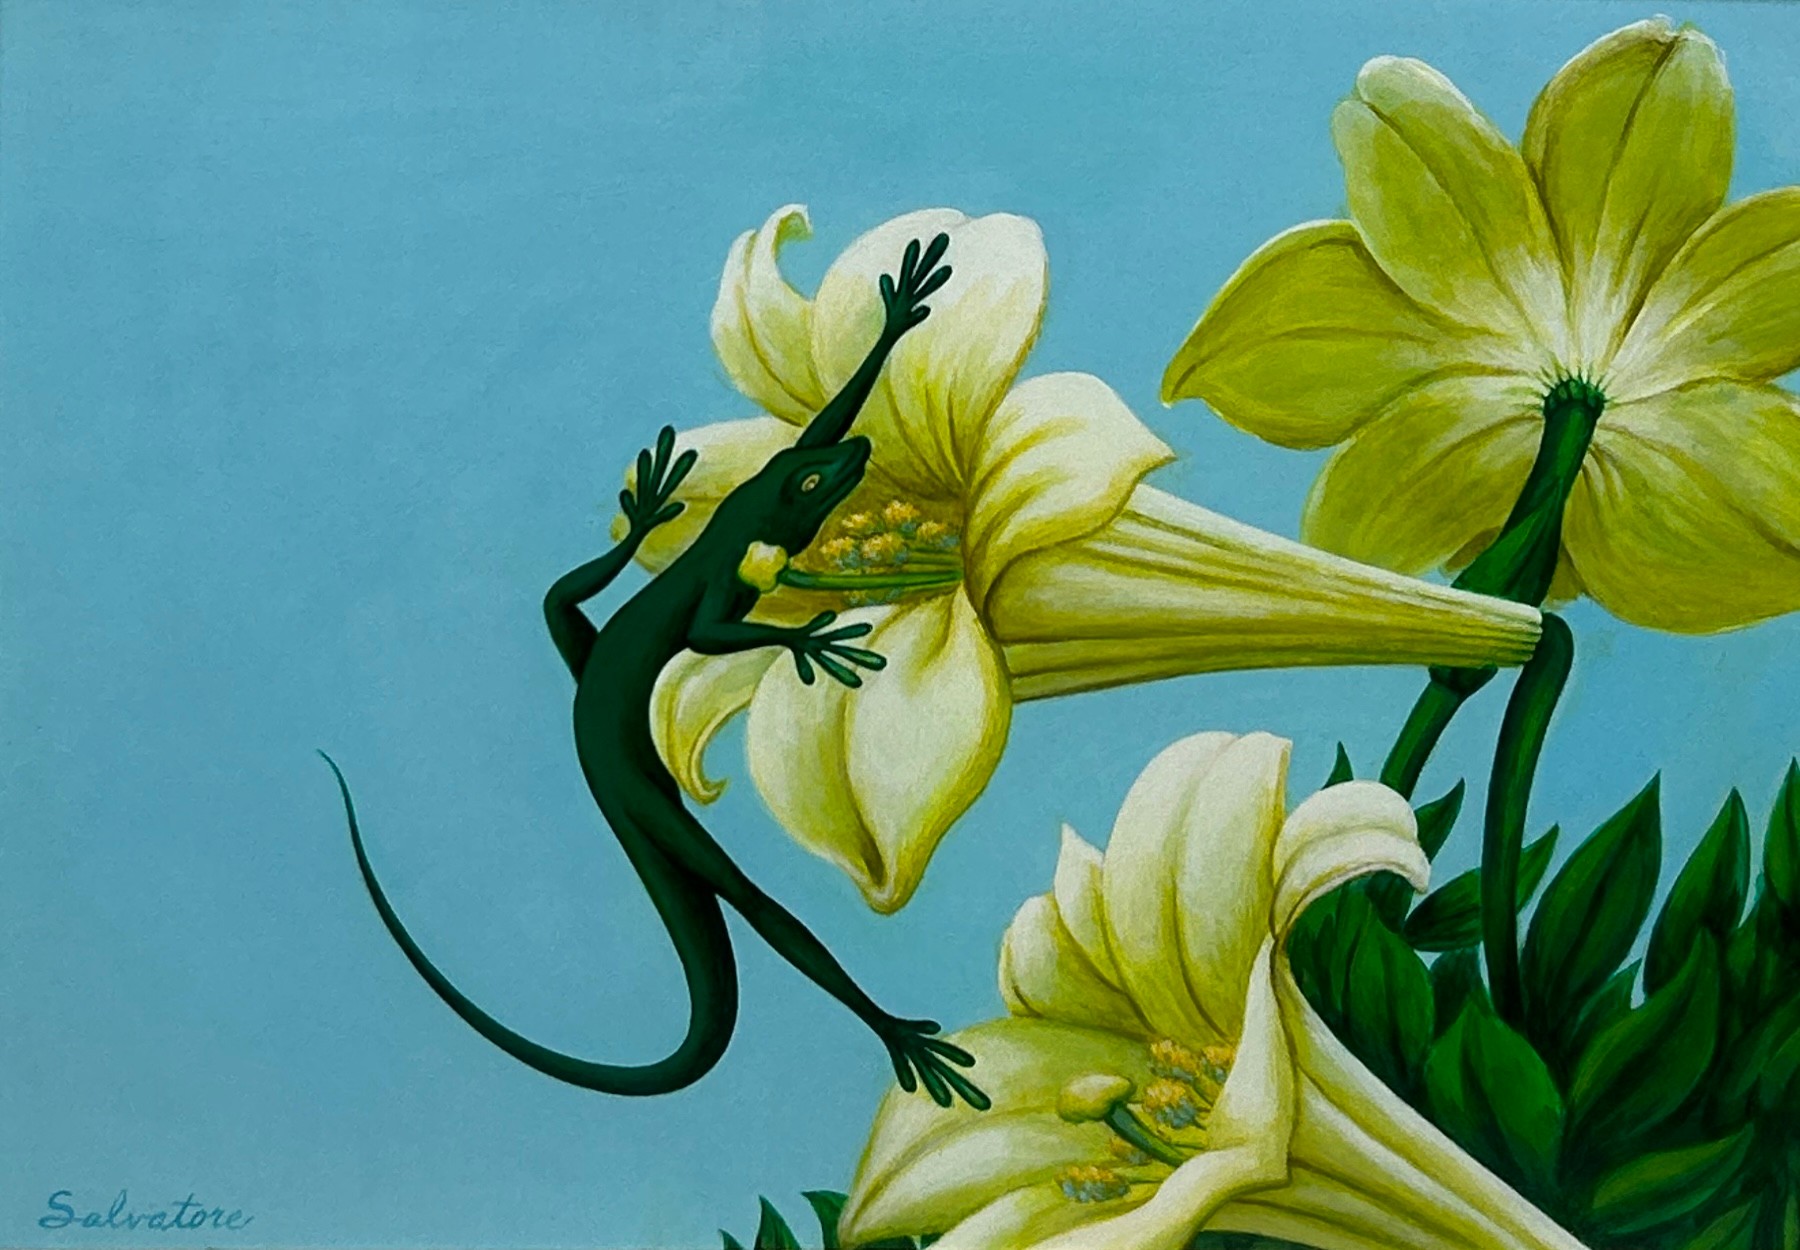 AN OIL ON BOARD PAINTING DEPICTING A GREEN LIZARD AND FLOWERS SIGNED 'SALVATORE', 34cm x 24cm - Image 2 of 3